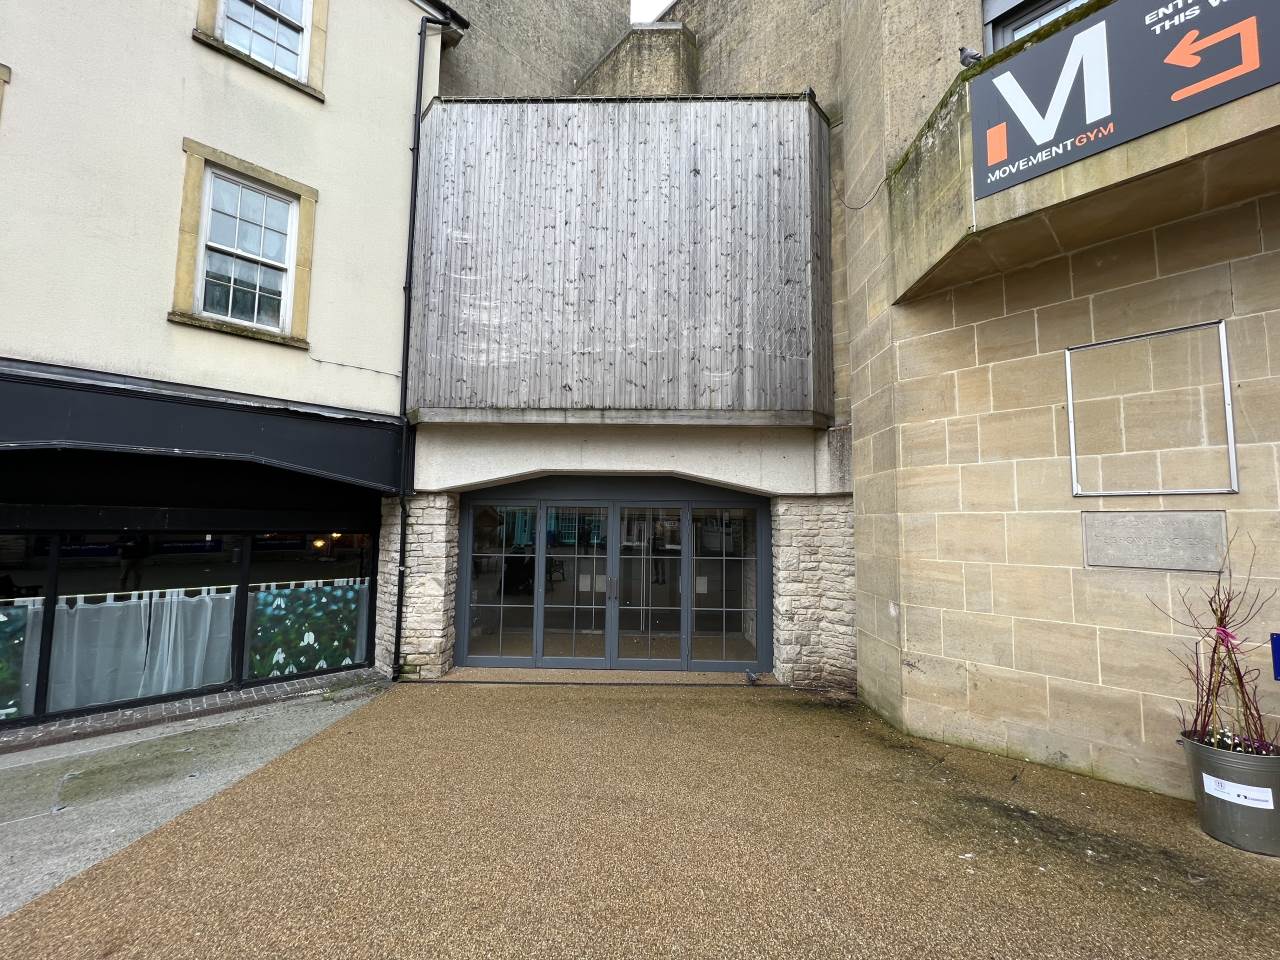 Business Transfer for rent in Shepton Mallet. From Lettings-R-Us Frome